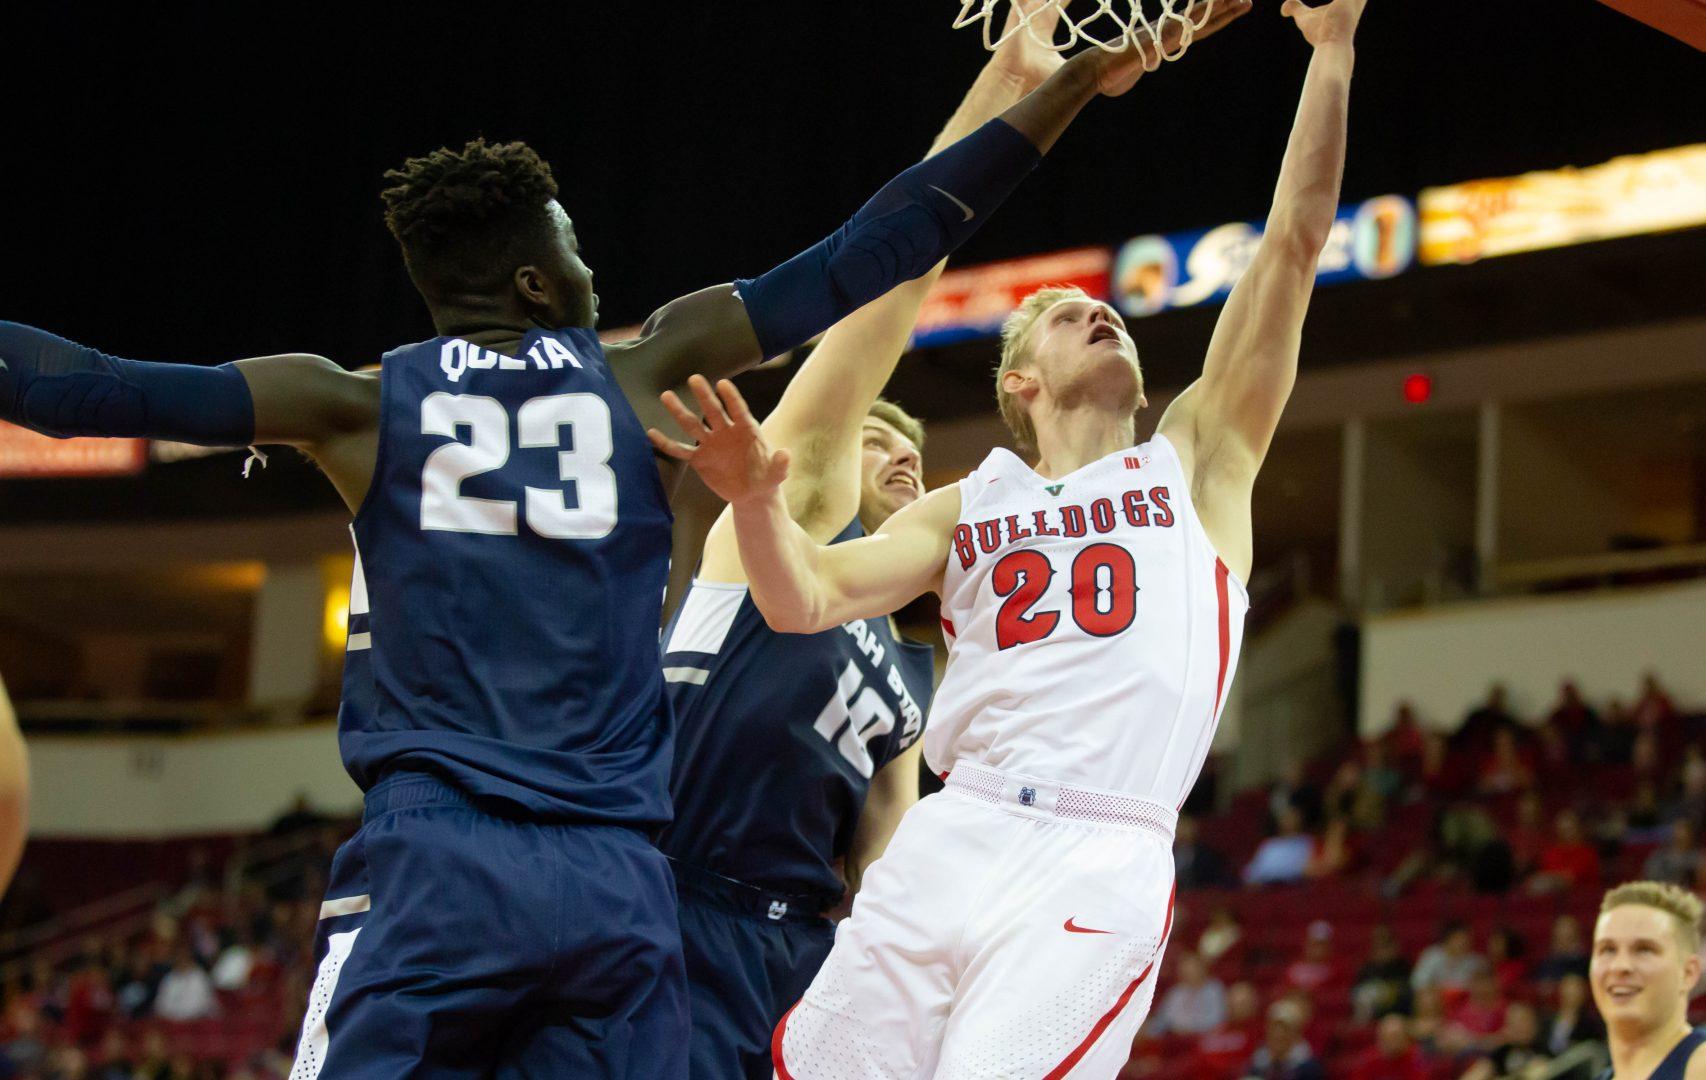 Fresno State forward Sam Bittner attempts a layup while defended by Utah State’s
Neemias Queta, left, and Quinn Taylor during the Bulldogs’ 82-81 loss at the Save Mart Center
on Feb. 5, 2019. (Jose Romo Jr./The Collegian).